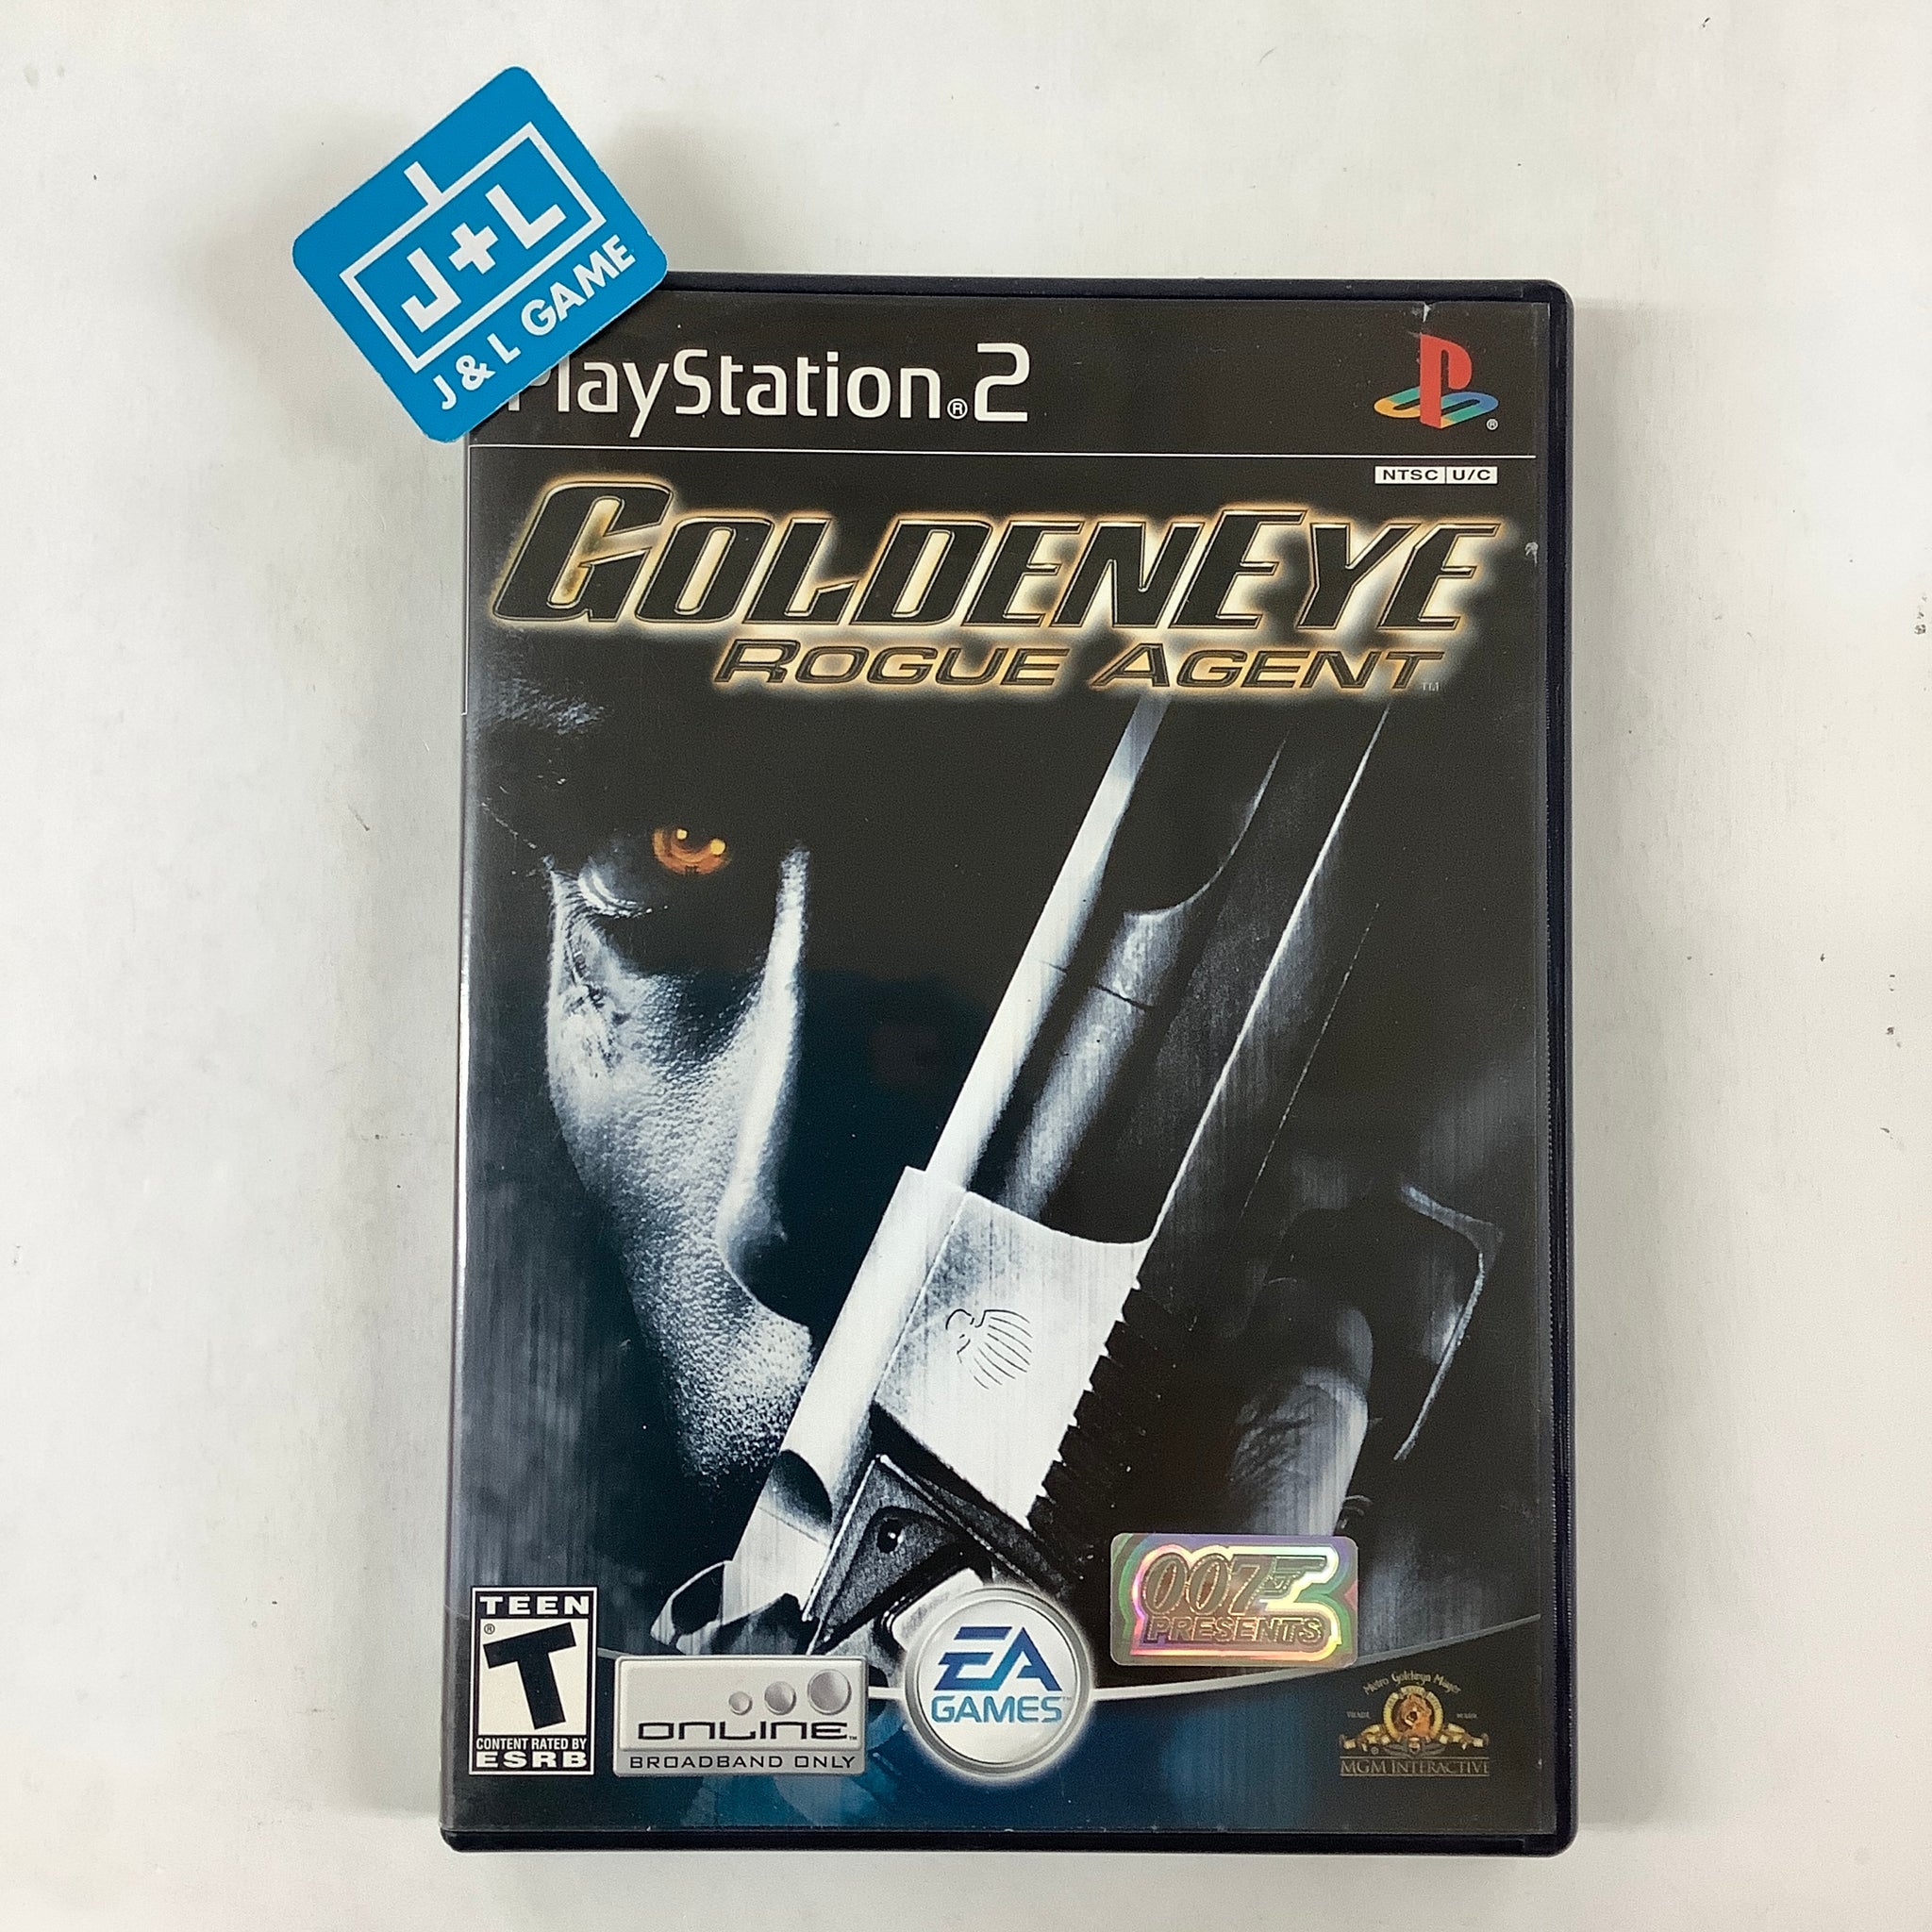 GoldenEye: Rogue Agent for PlayStation 2 (PS2)